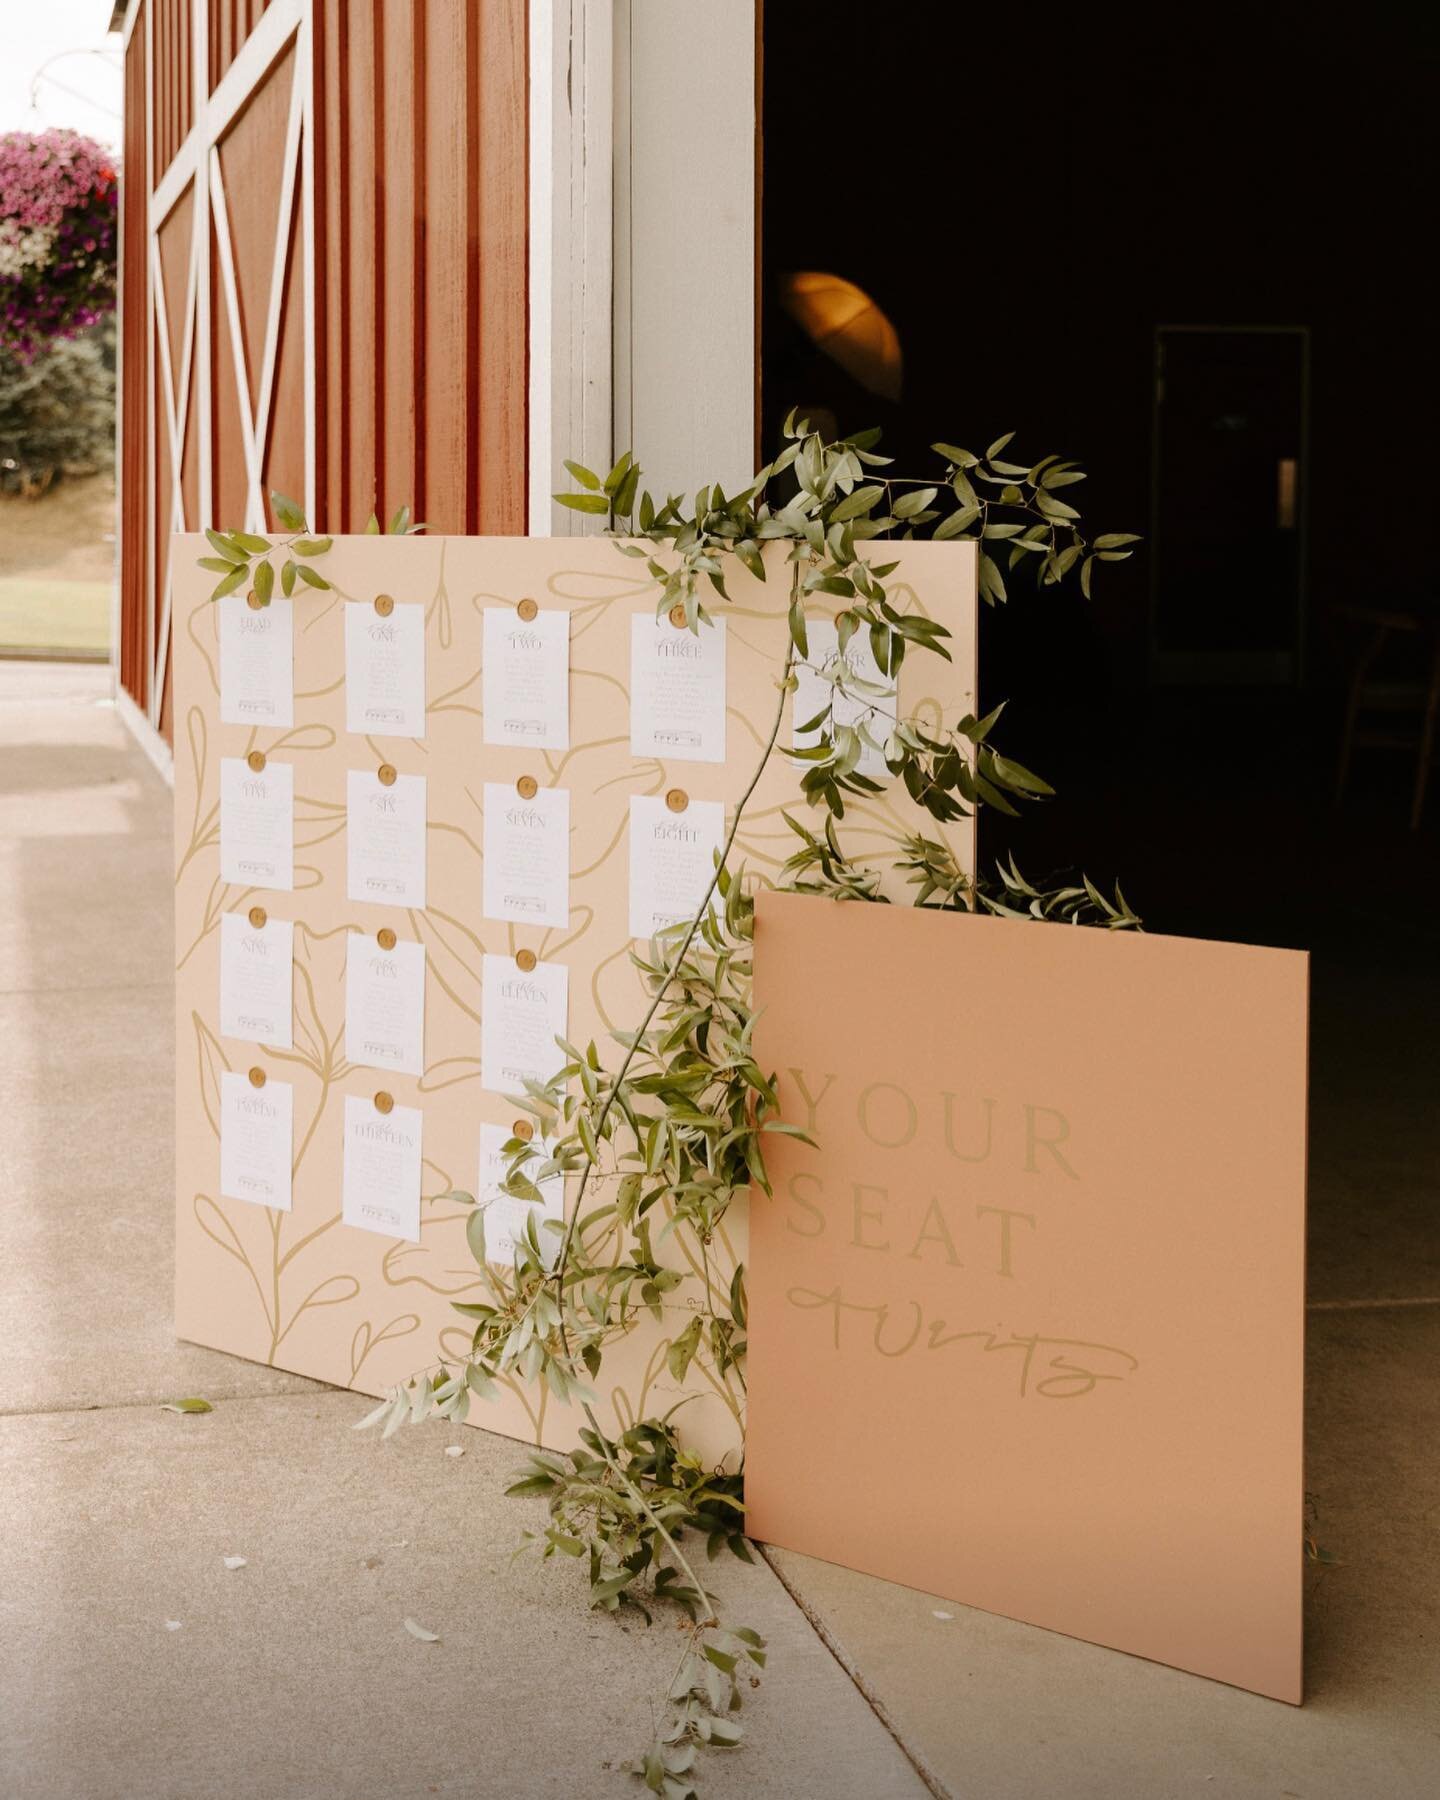 Don&rsquo;t Forget the Seating Chart! ✨ Creating a seating chart goes beyond names on paper; it sets the tone for your guests&rsquo; experience. Here are tips to seat people effectively:

Best Ways to Seat People:
- Consider guest relationships: Seat